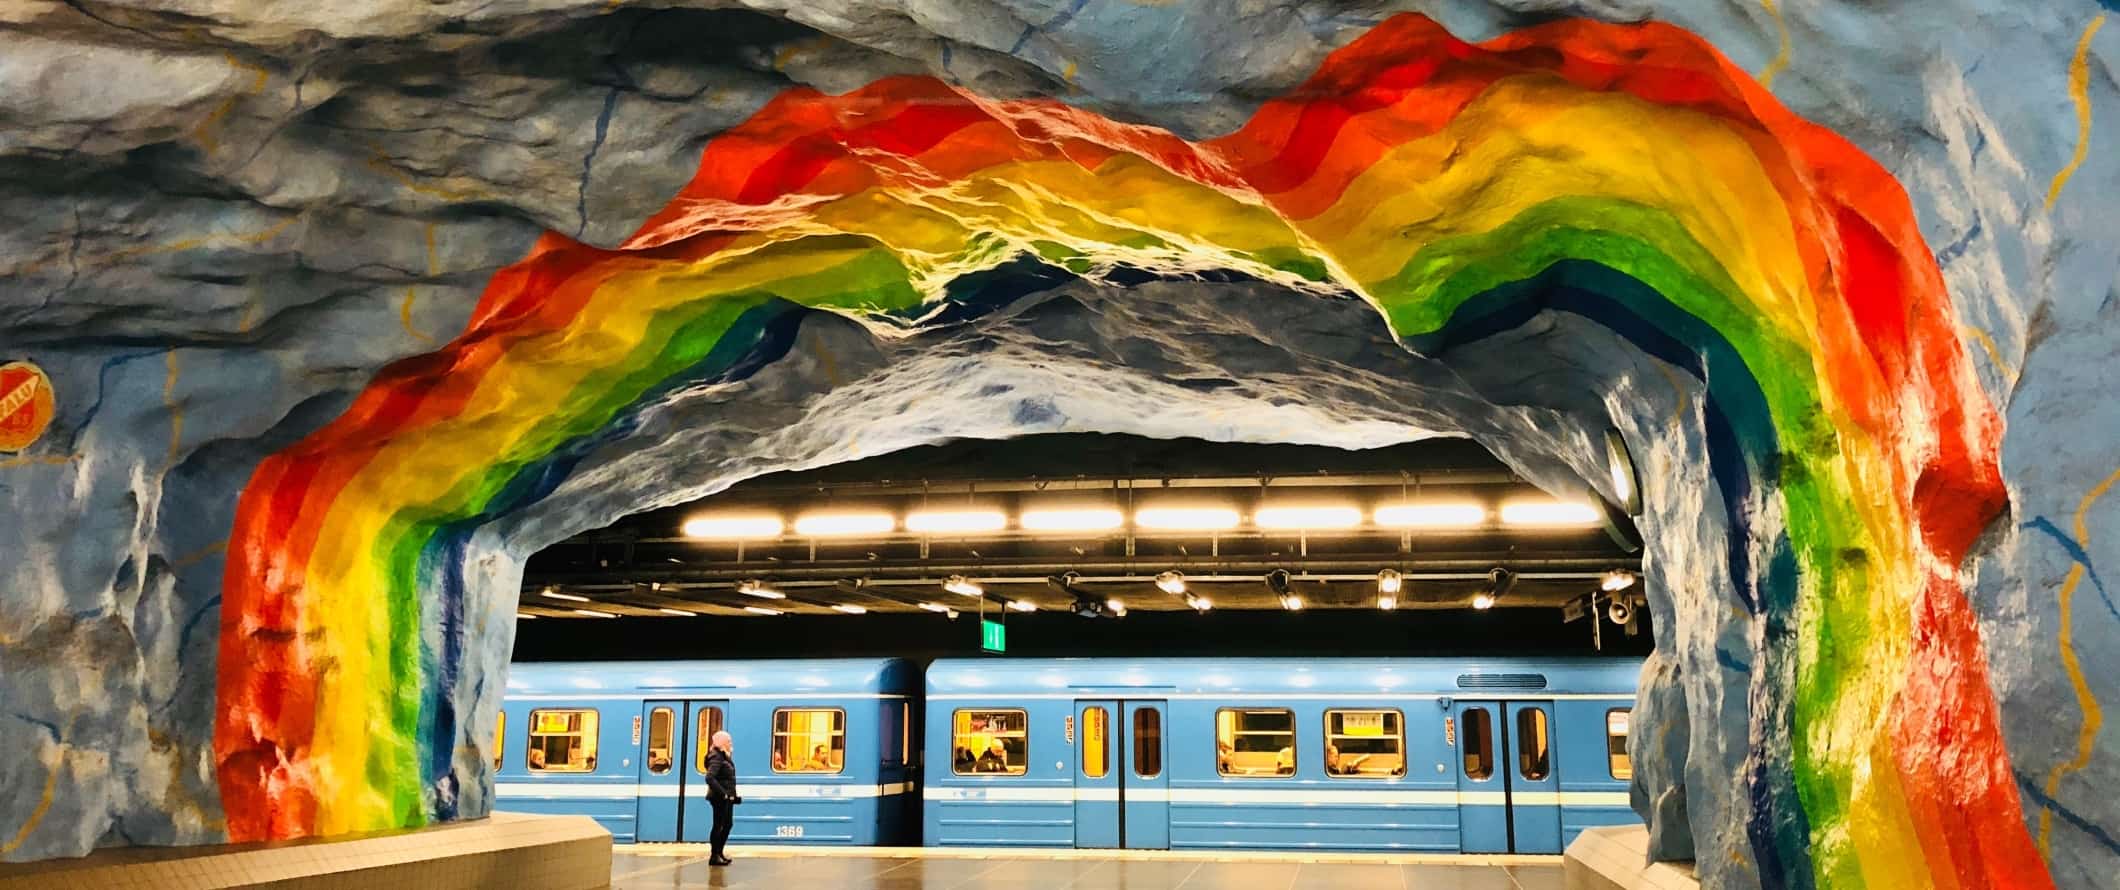 A rainbow mural in the subway with a blue train pulling into the station in Stockholm, Sweden